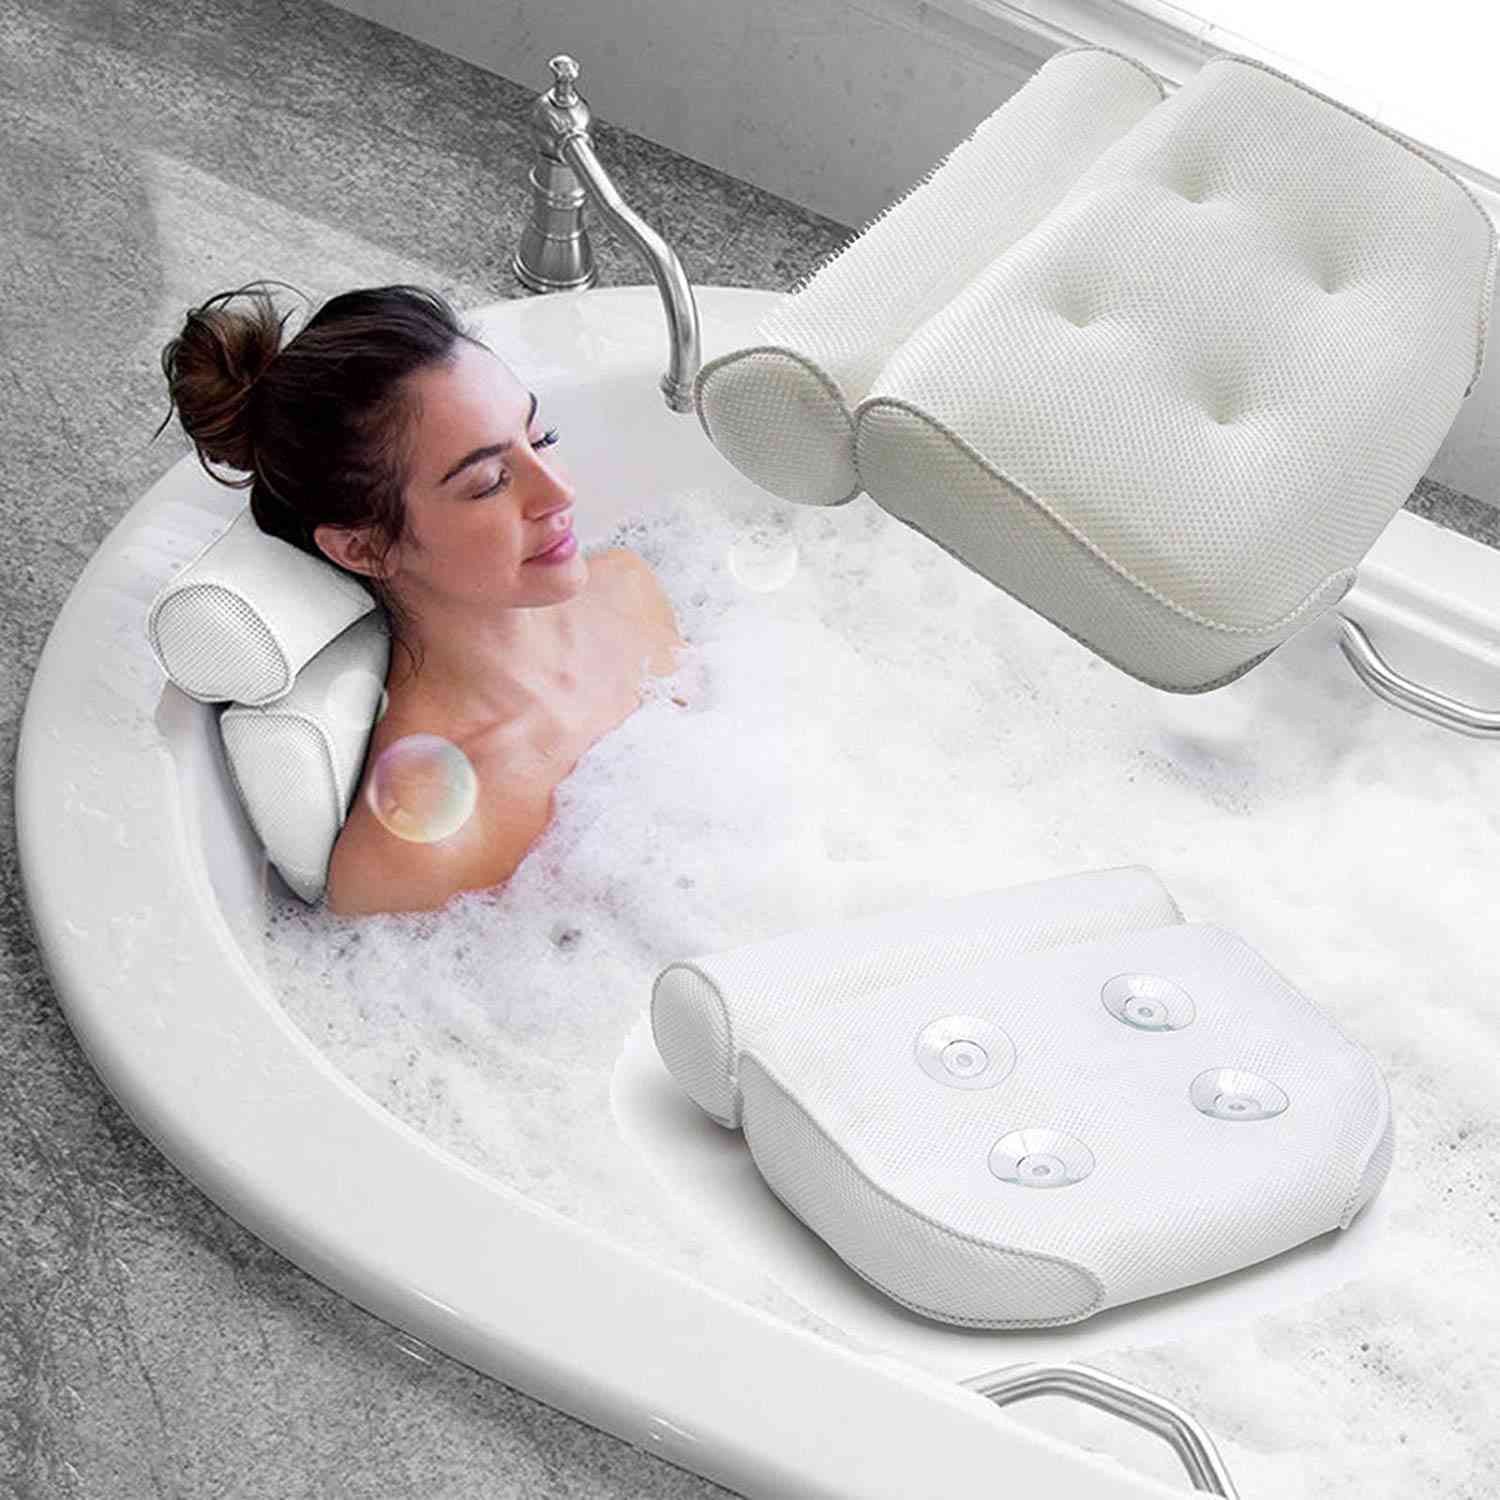 Luxury Home Bath Spa Pillow - Deep Spongy Cushion, Relaxing Massage Big Suction Cup